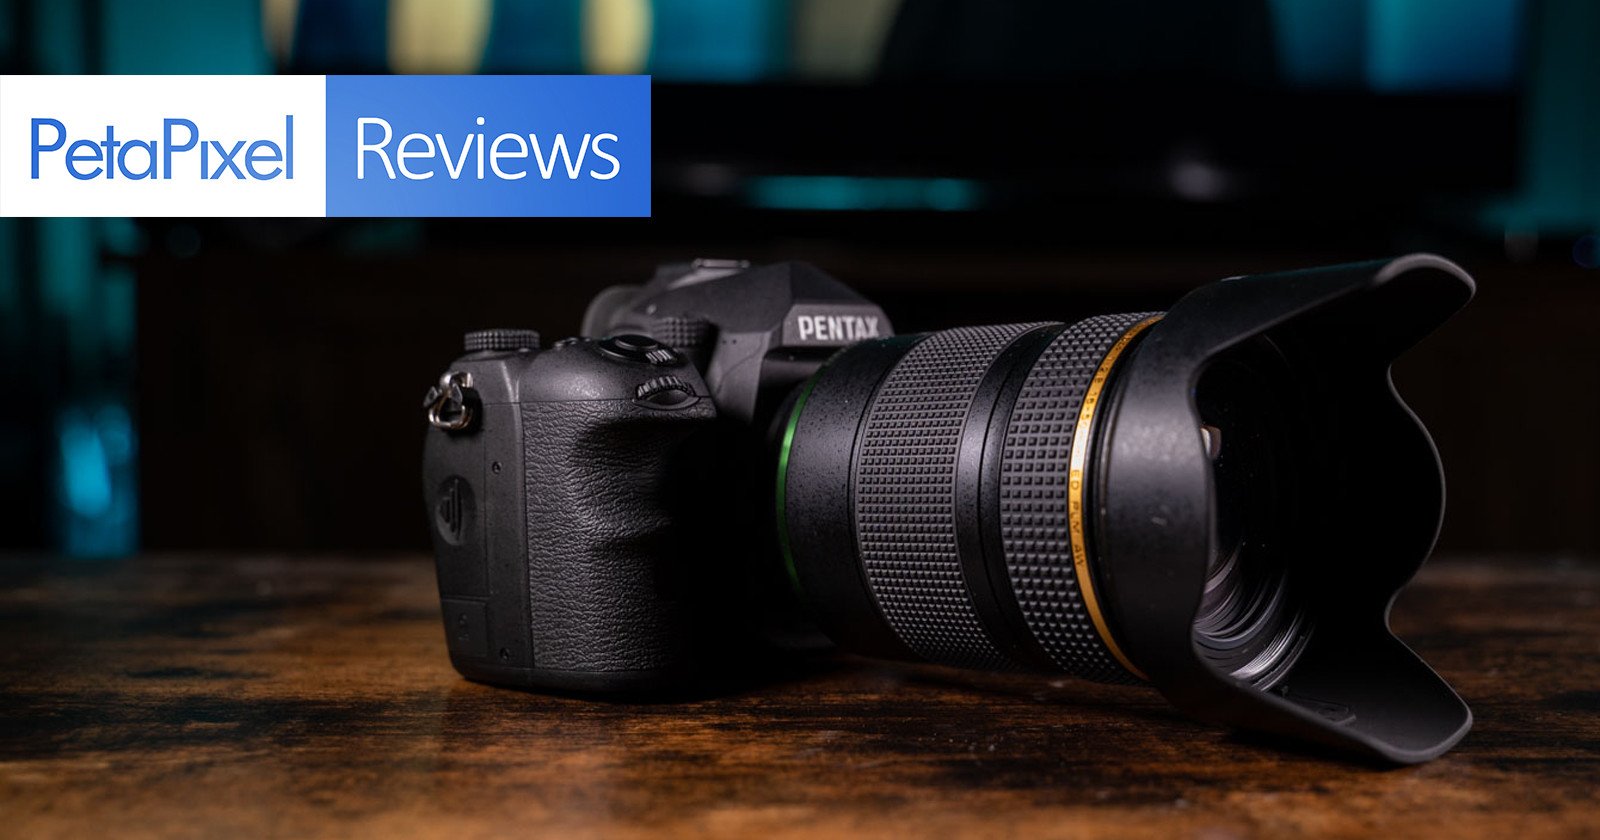 Pentax DA* 16-50mm f/2.8 Review: The Best Lens for the K-3 Mark III